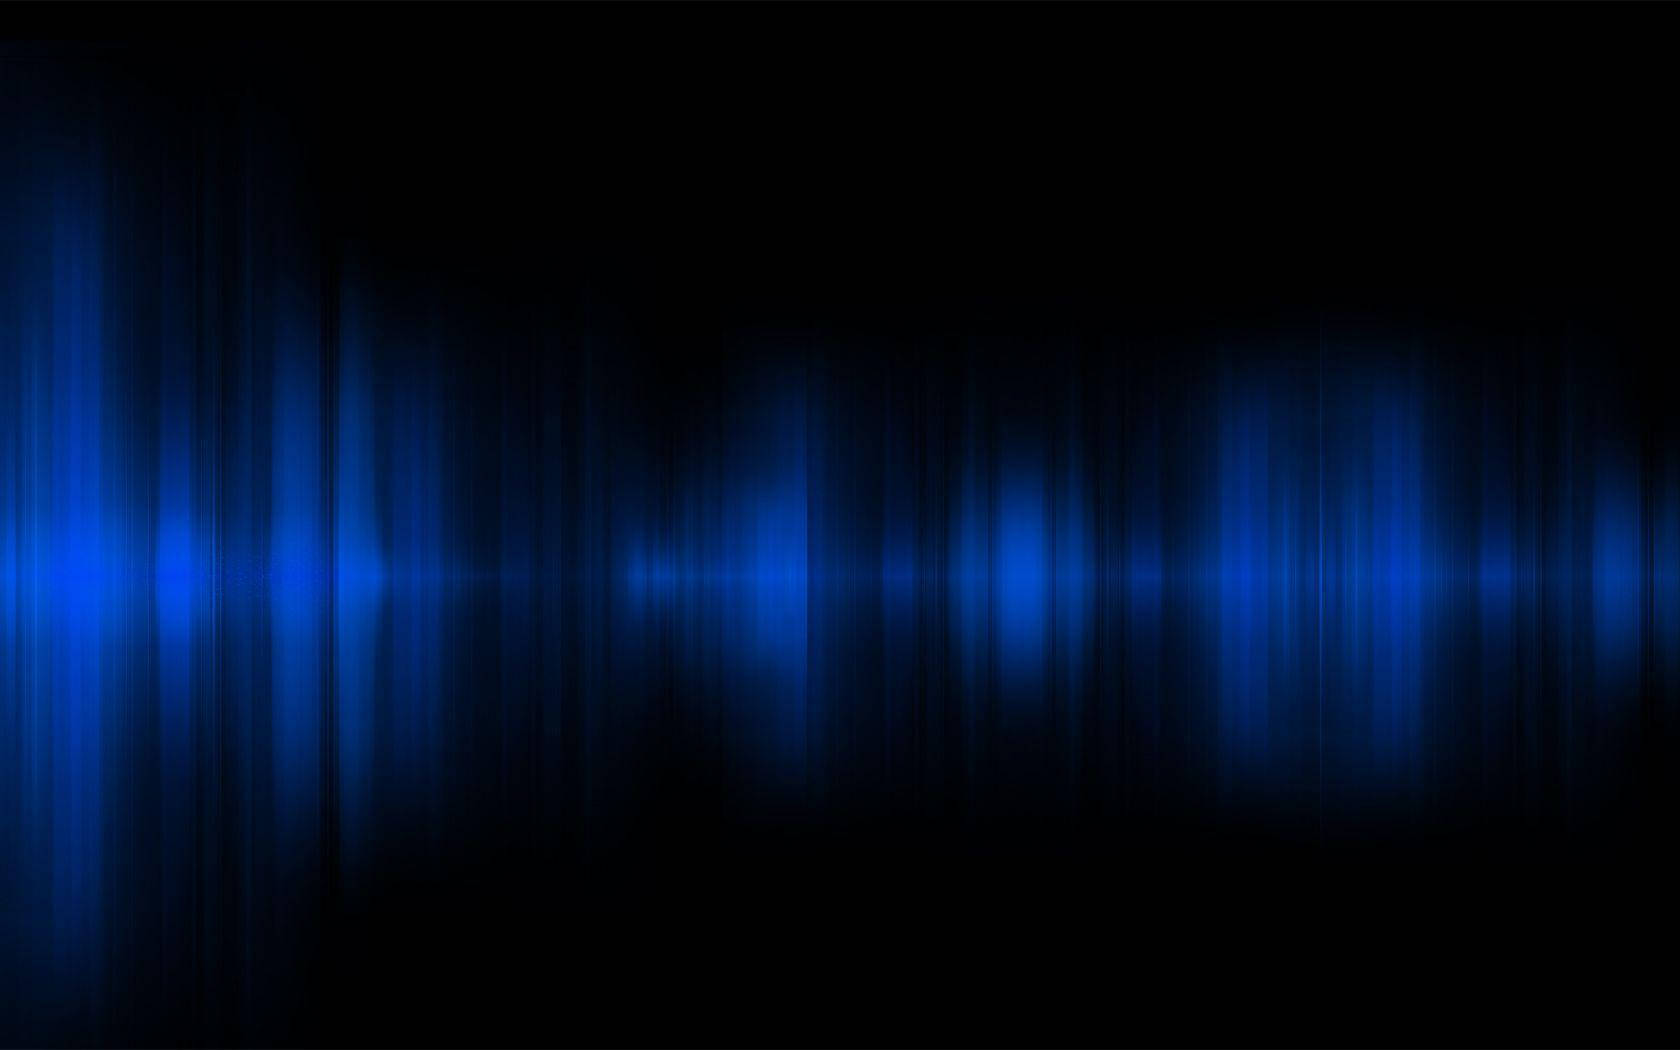 Blurry Wavelengths On Black And Blue Background Wallpaper